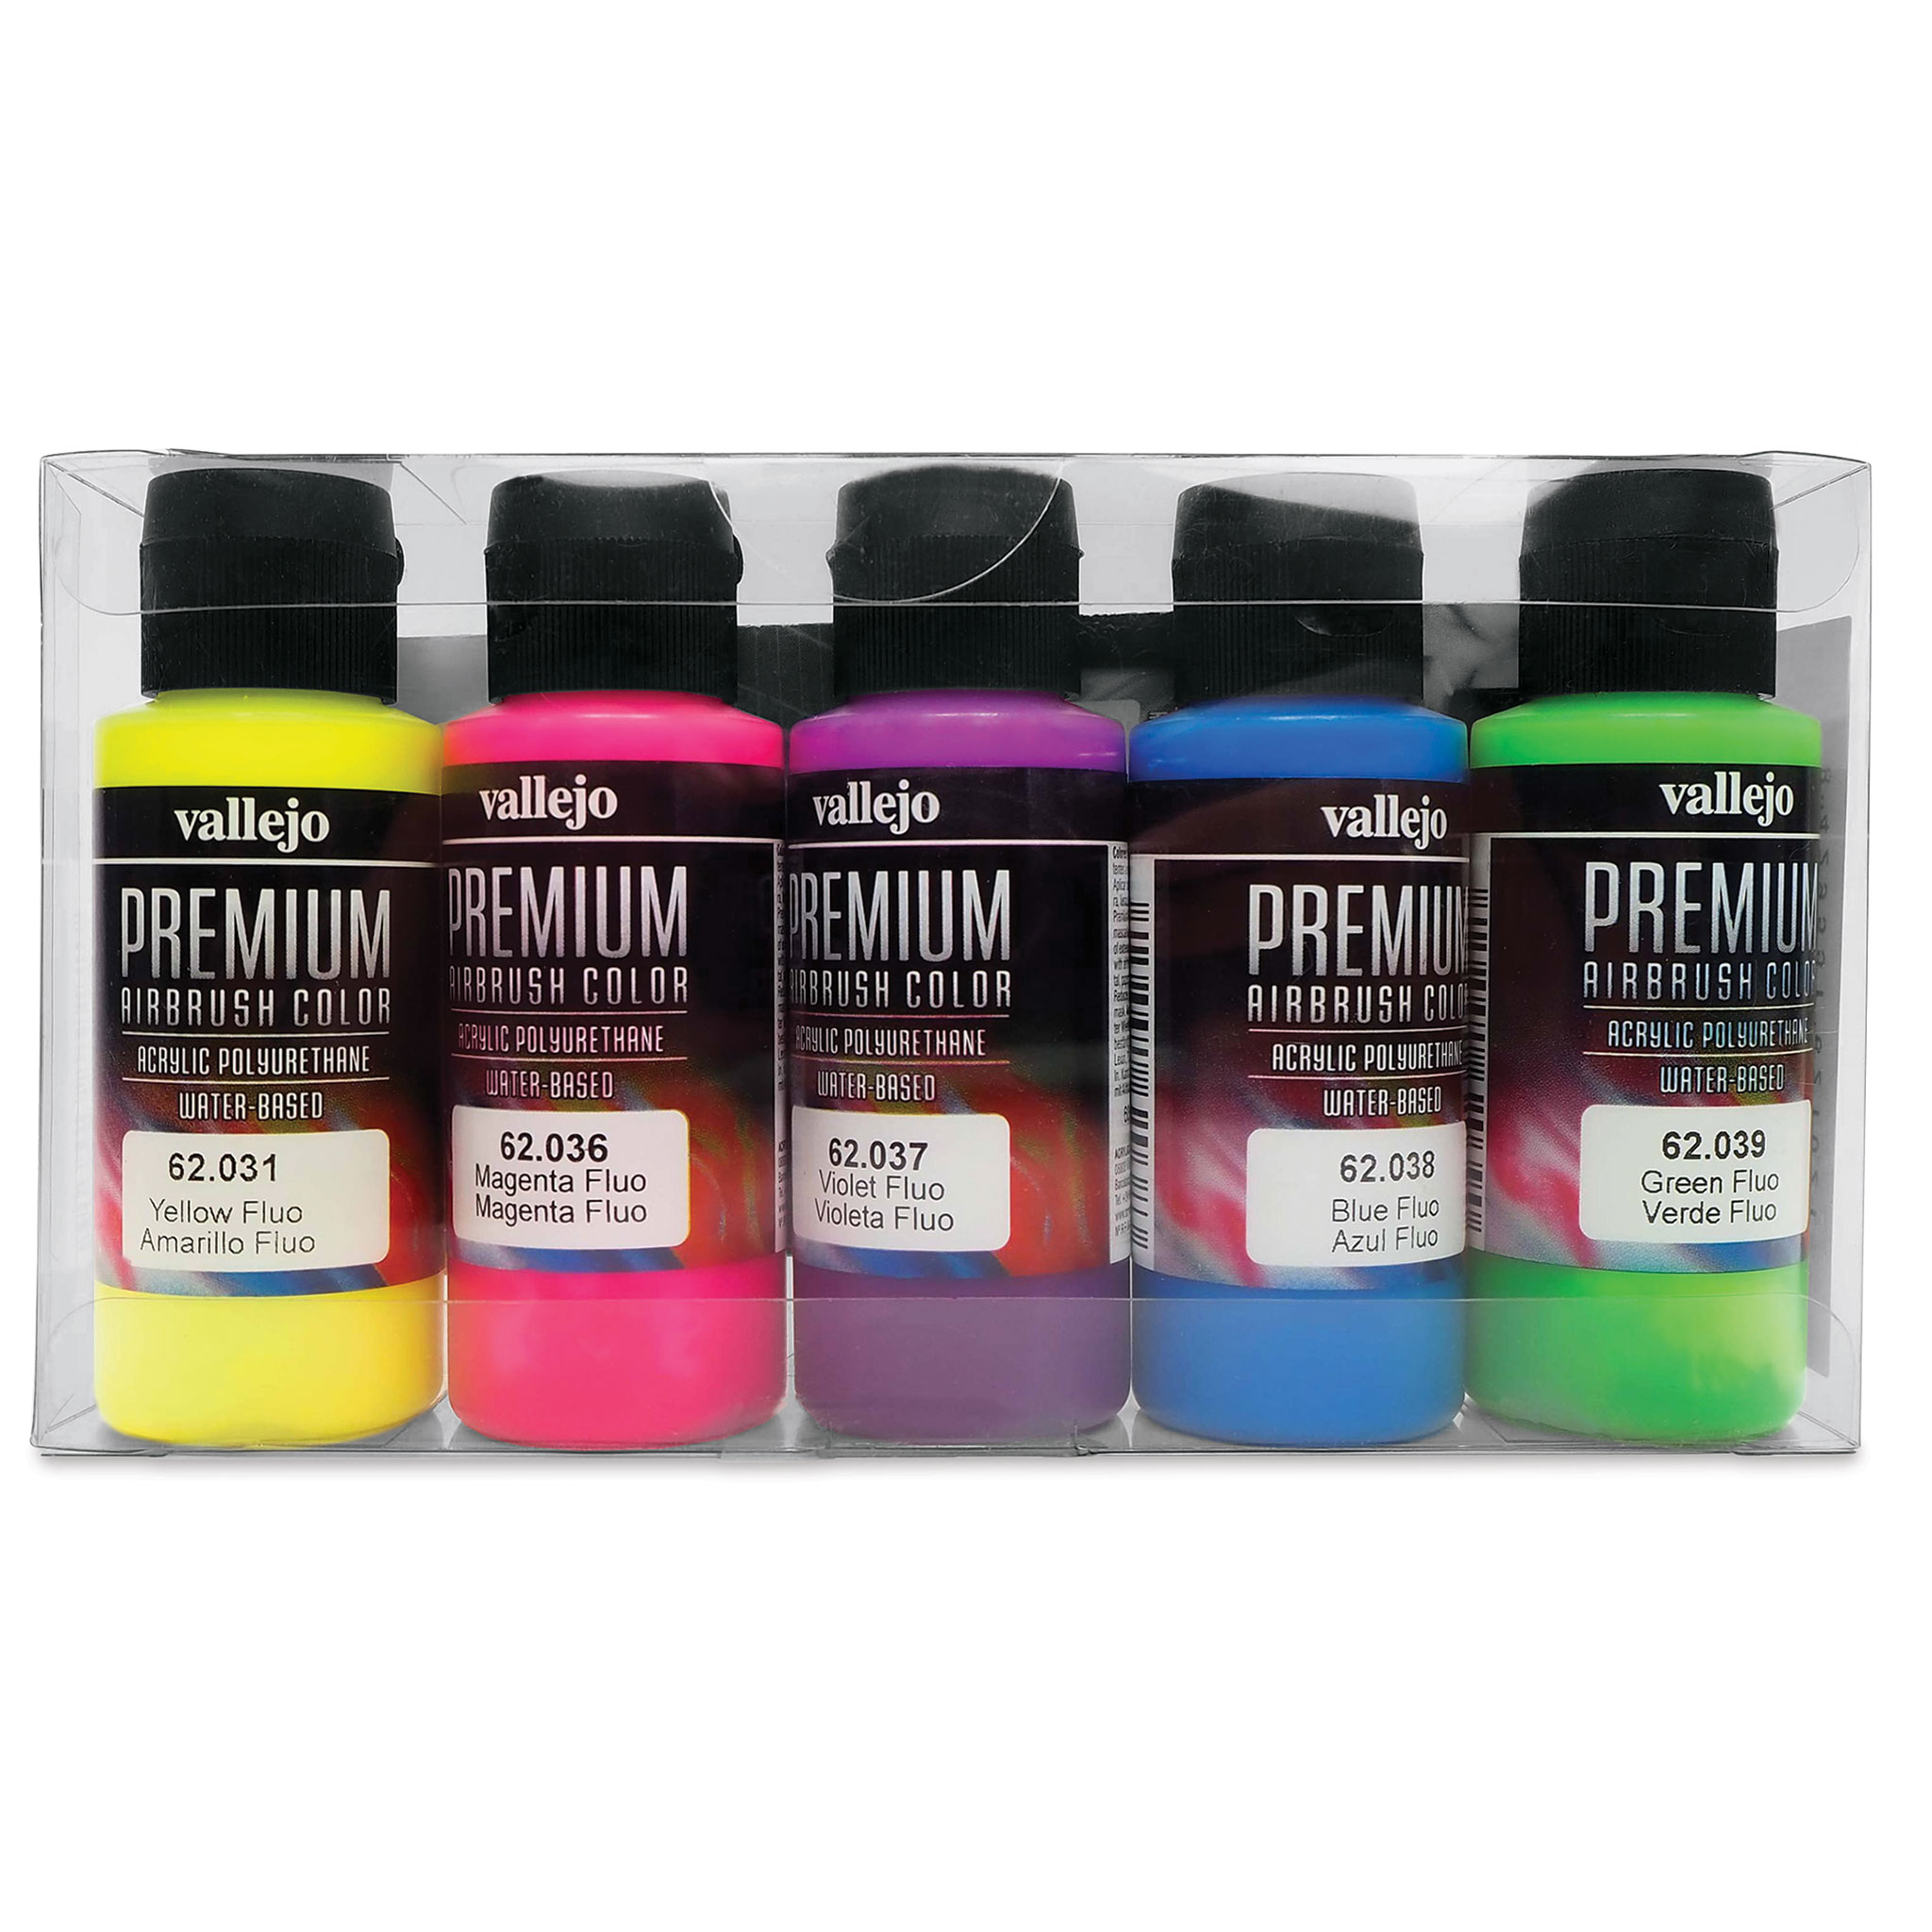 Vallejo Premium Airbrush Colors - 60 ml, Candy Racing Blue